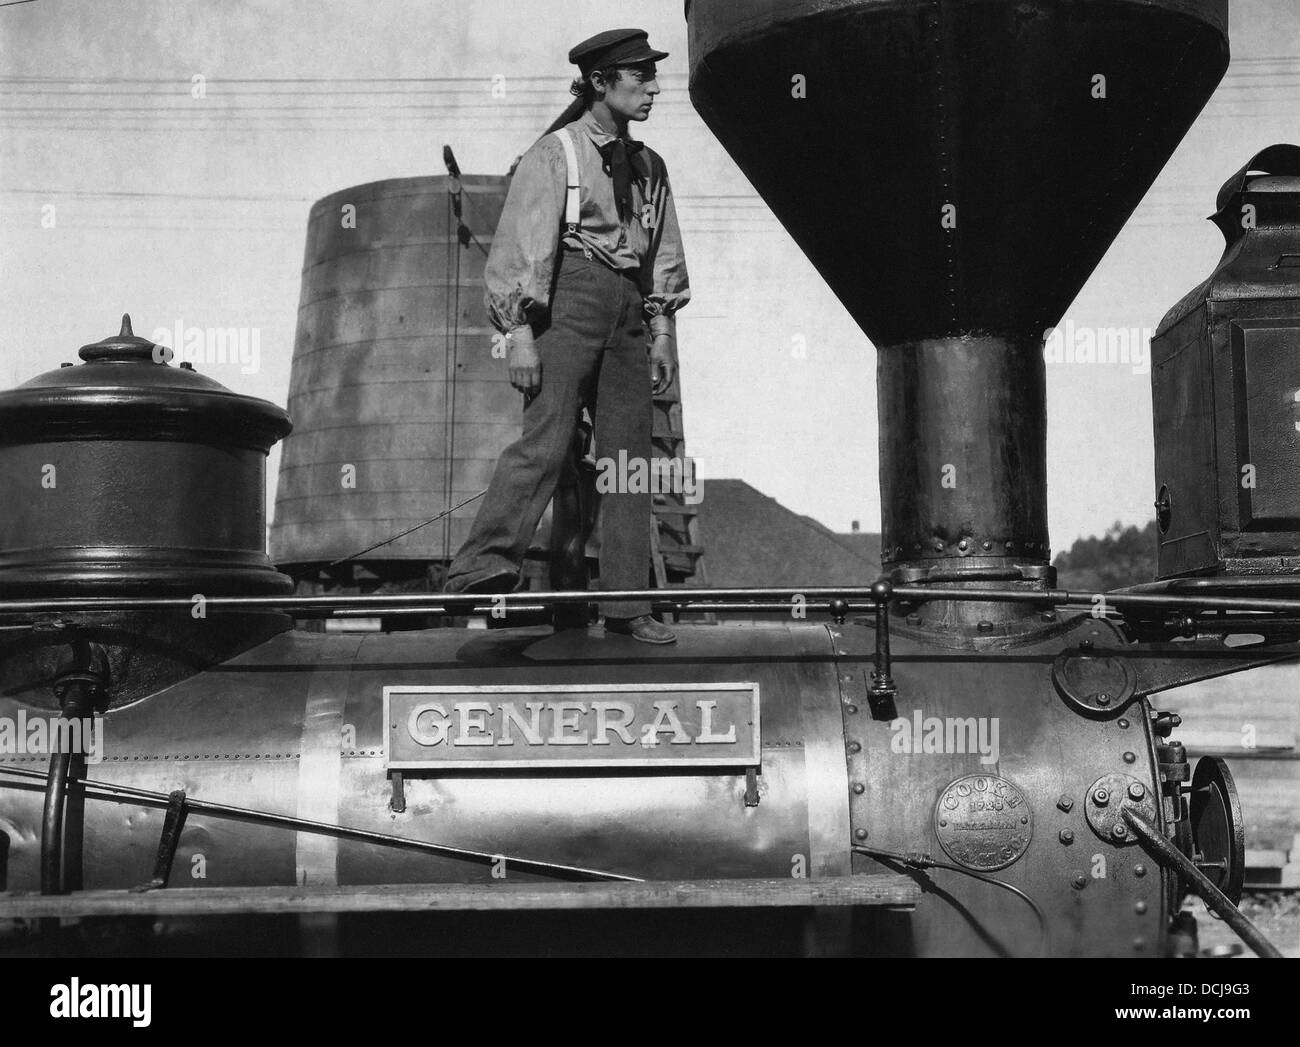 THE GENERAL - Buster Keaton Productions 1927 Stock Photo